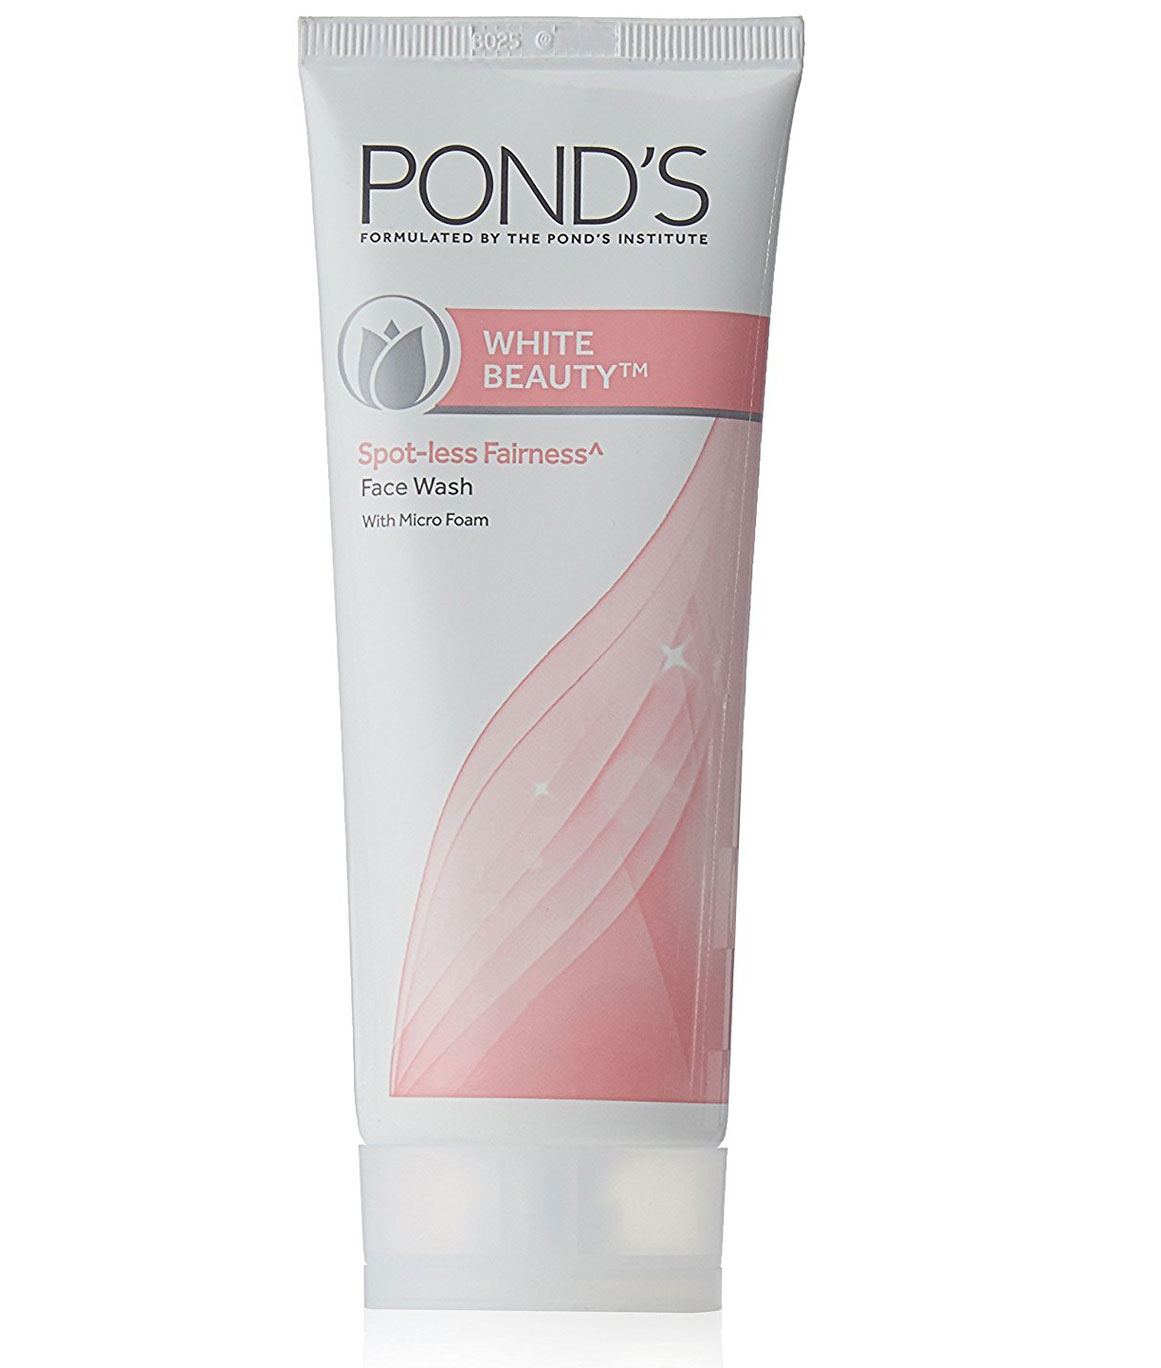 PONDS White Beauty Face Wash (20ml) - Set of 4